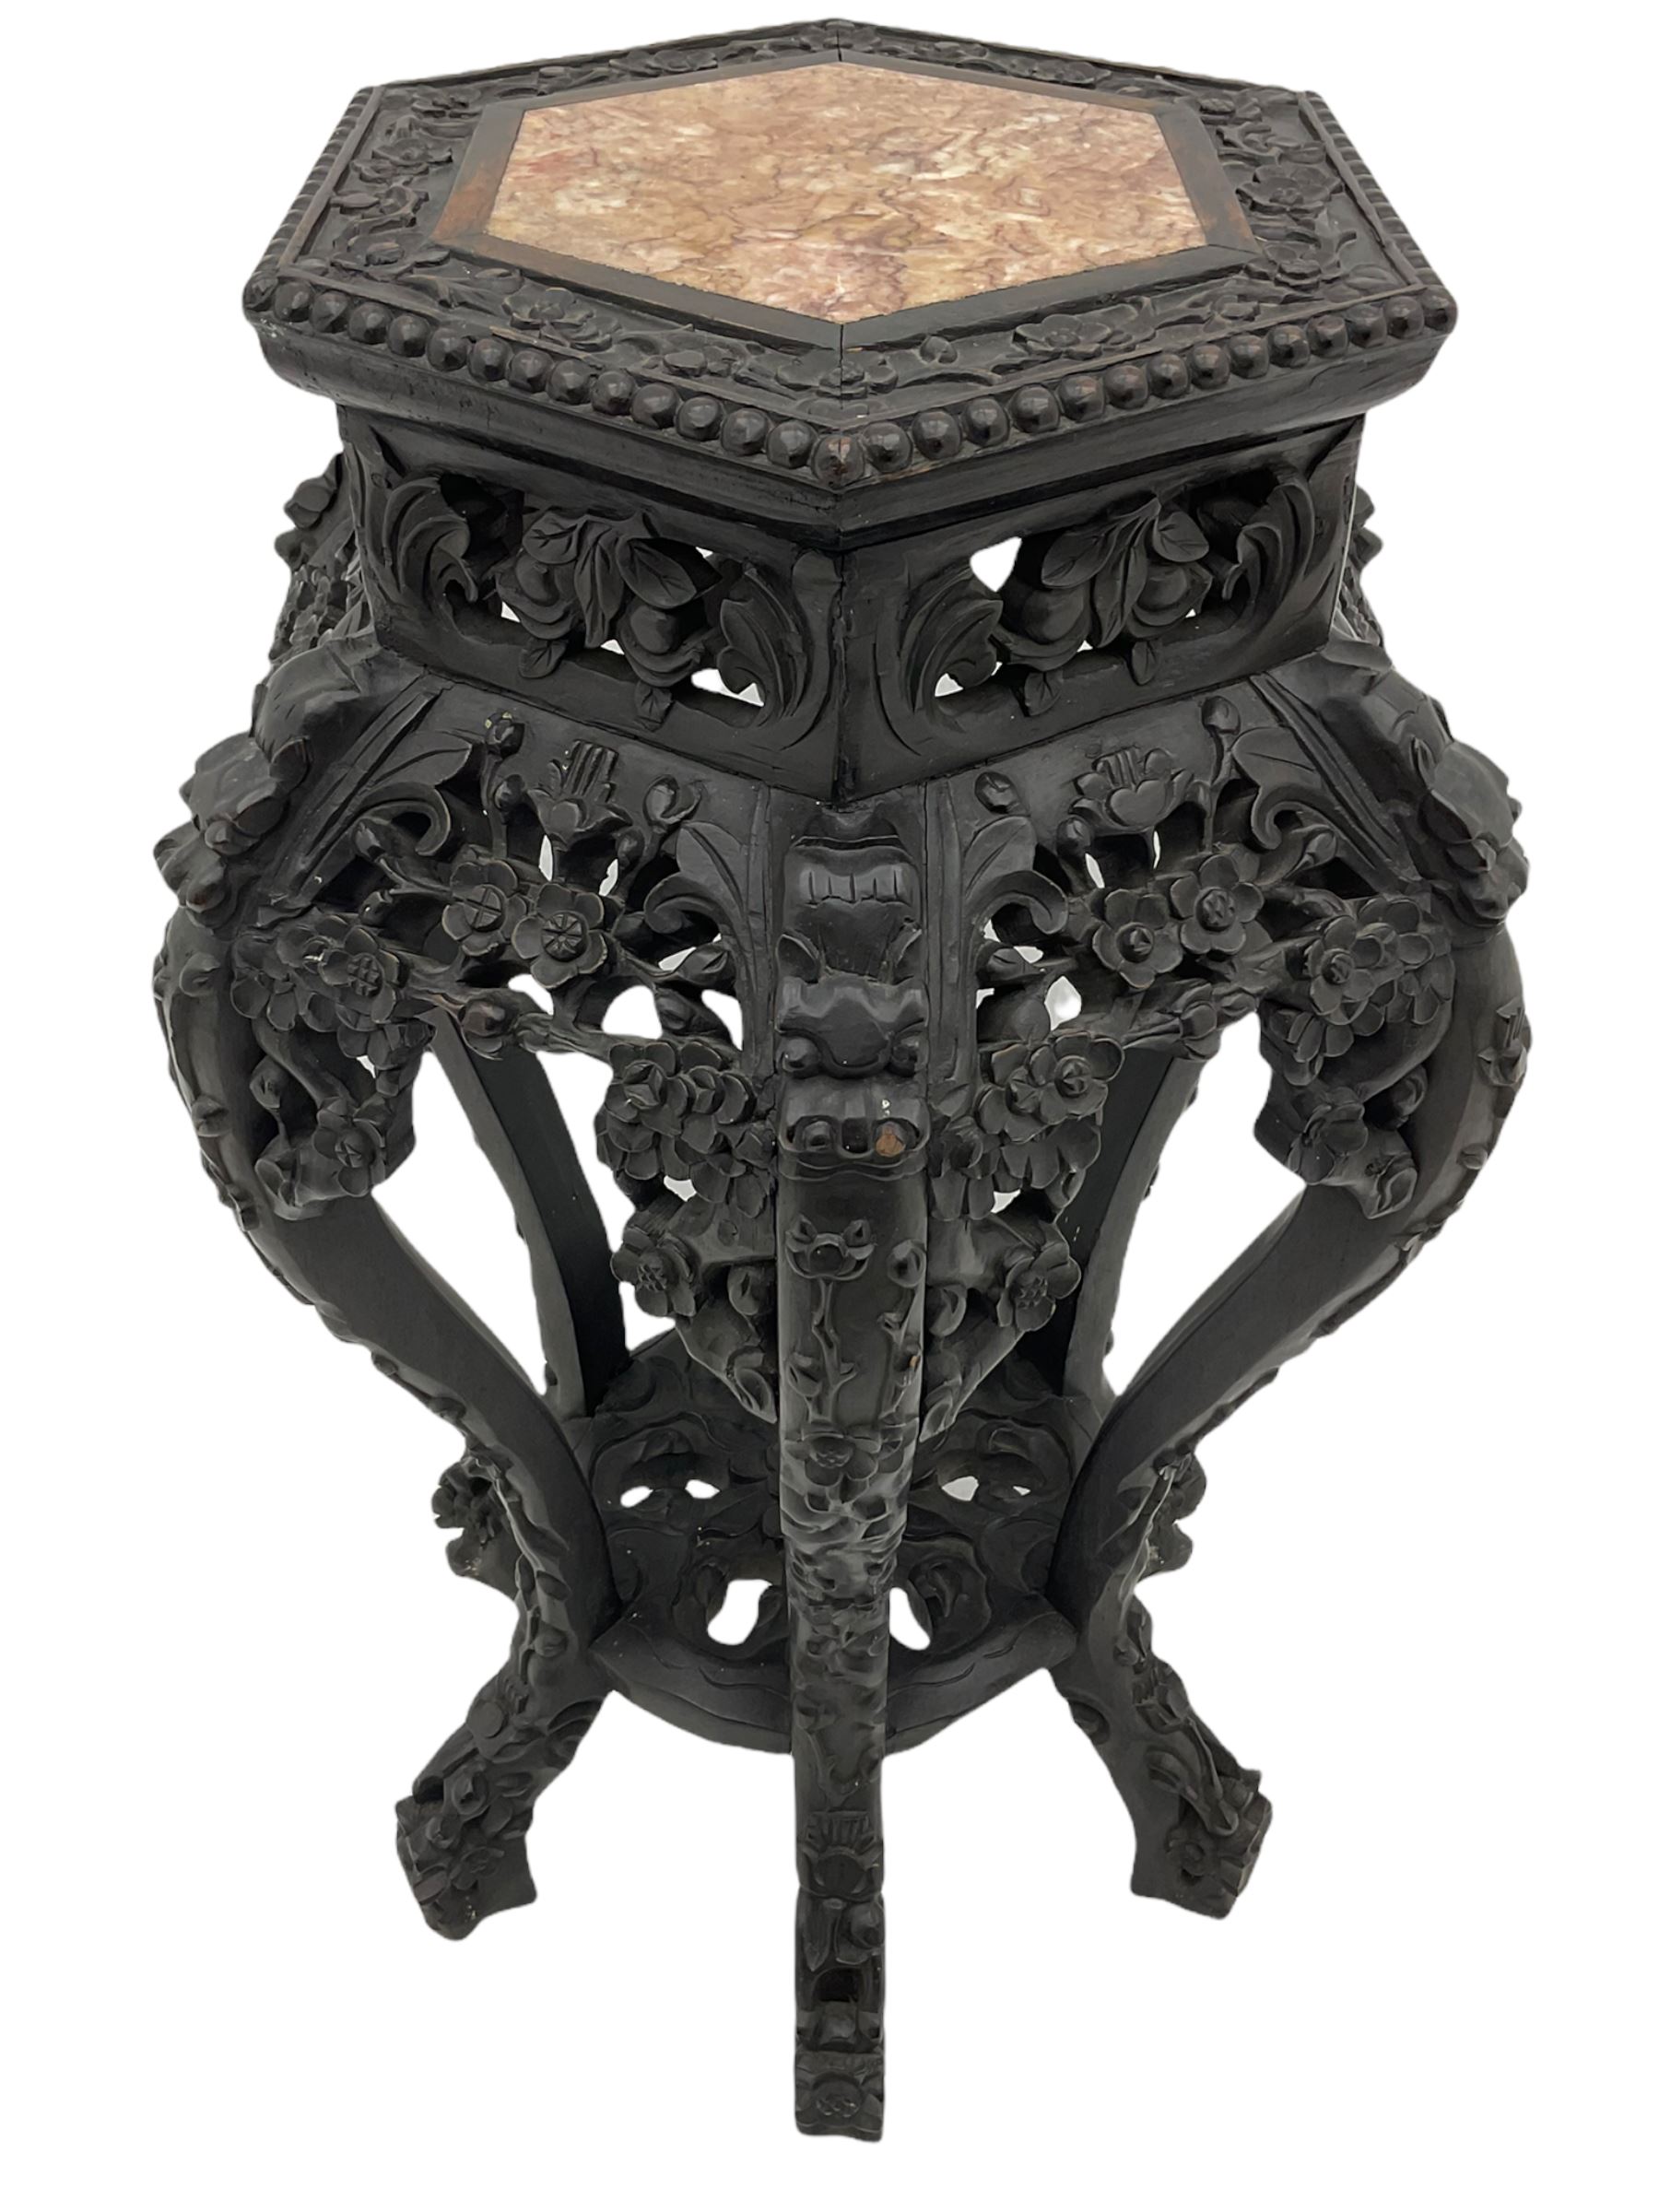 Chinese carved hardwood jardini�re stand - Image 2 of 8